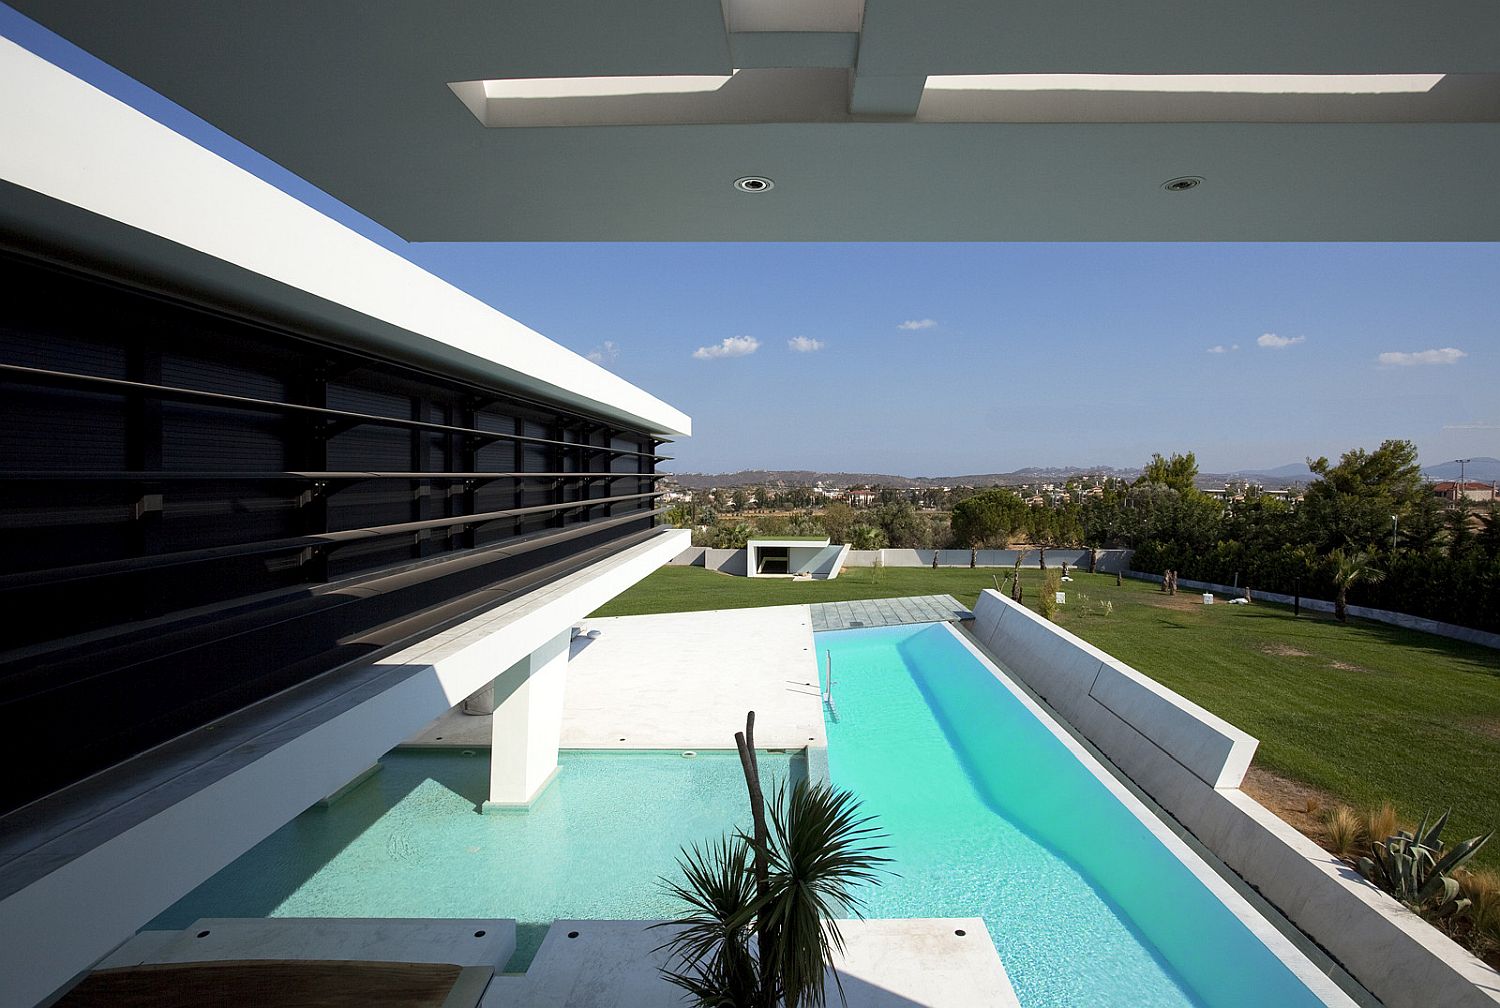 Home hovers above the pool area to offer a stunning visual